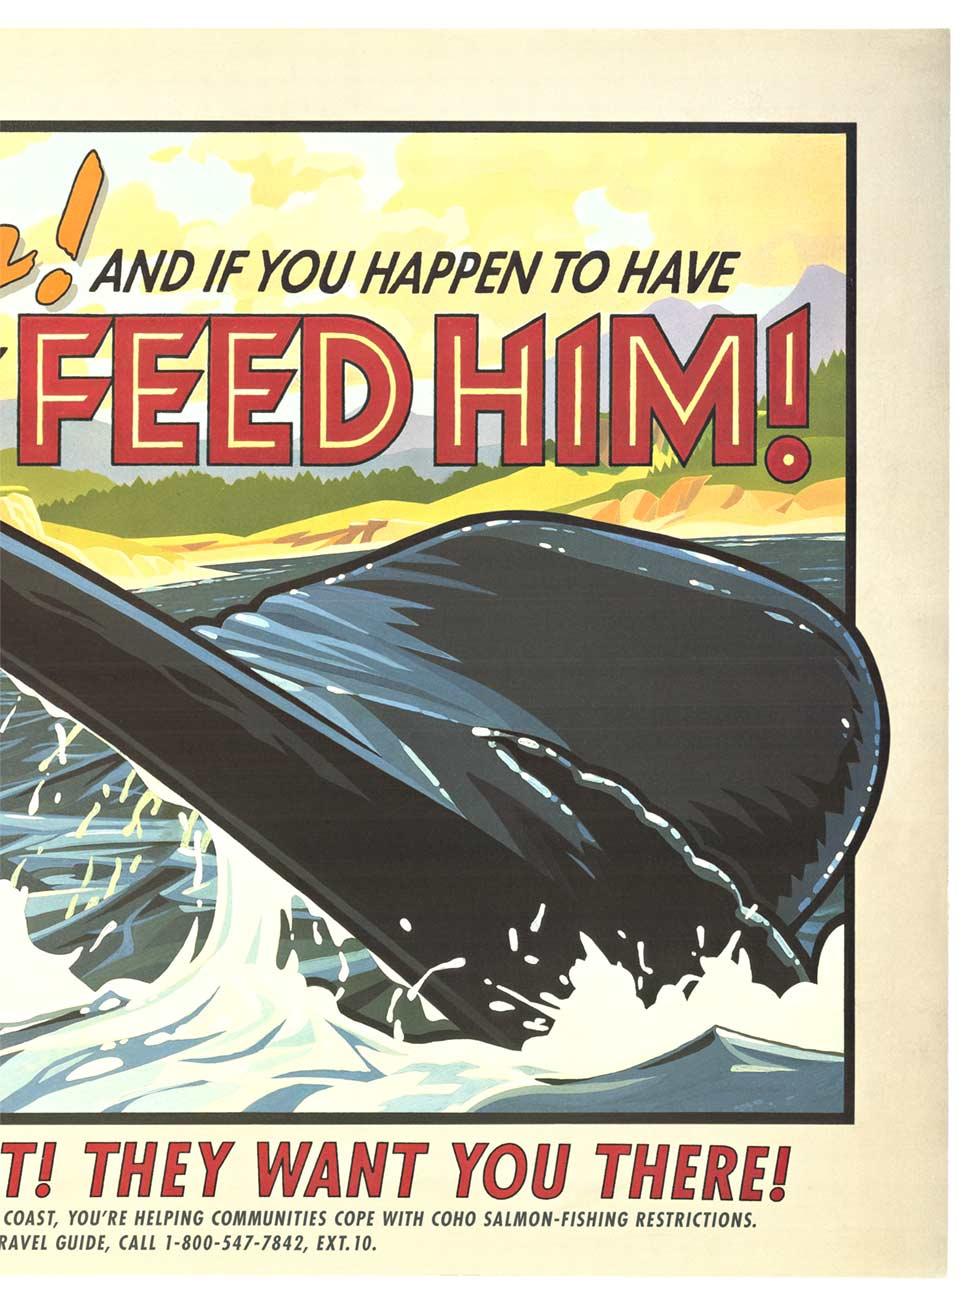 Original 'Watch Him! Feed Him! Go to the Oregon Coast!' vintage poster - American Modern Print by J Foster